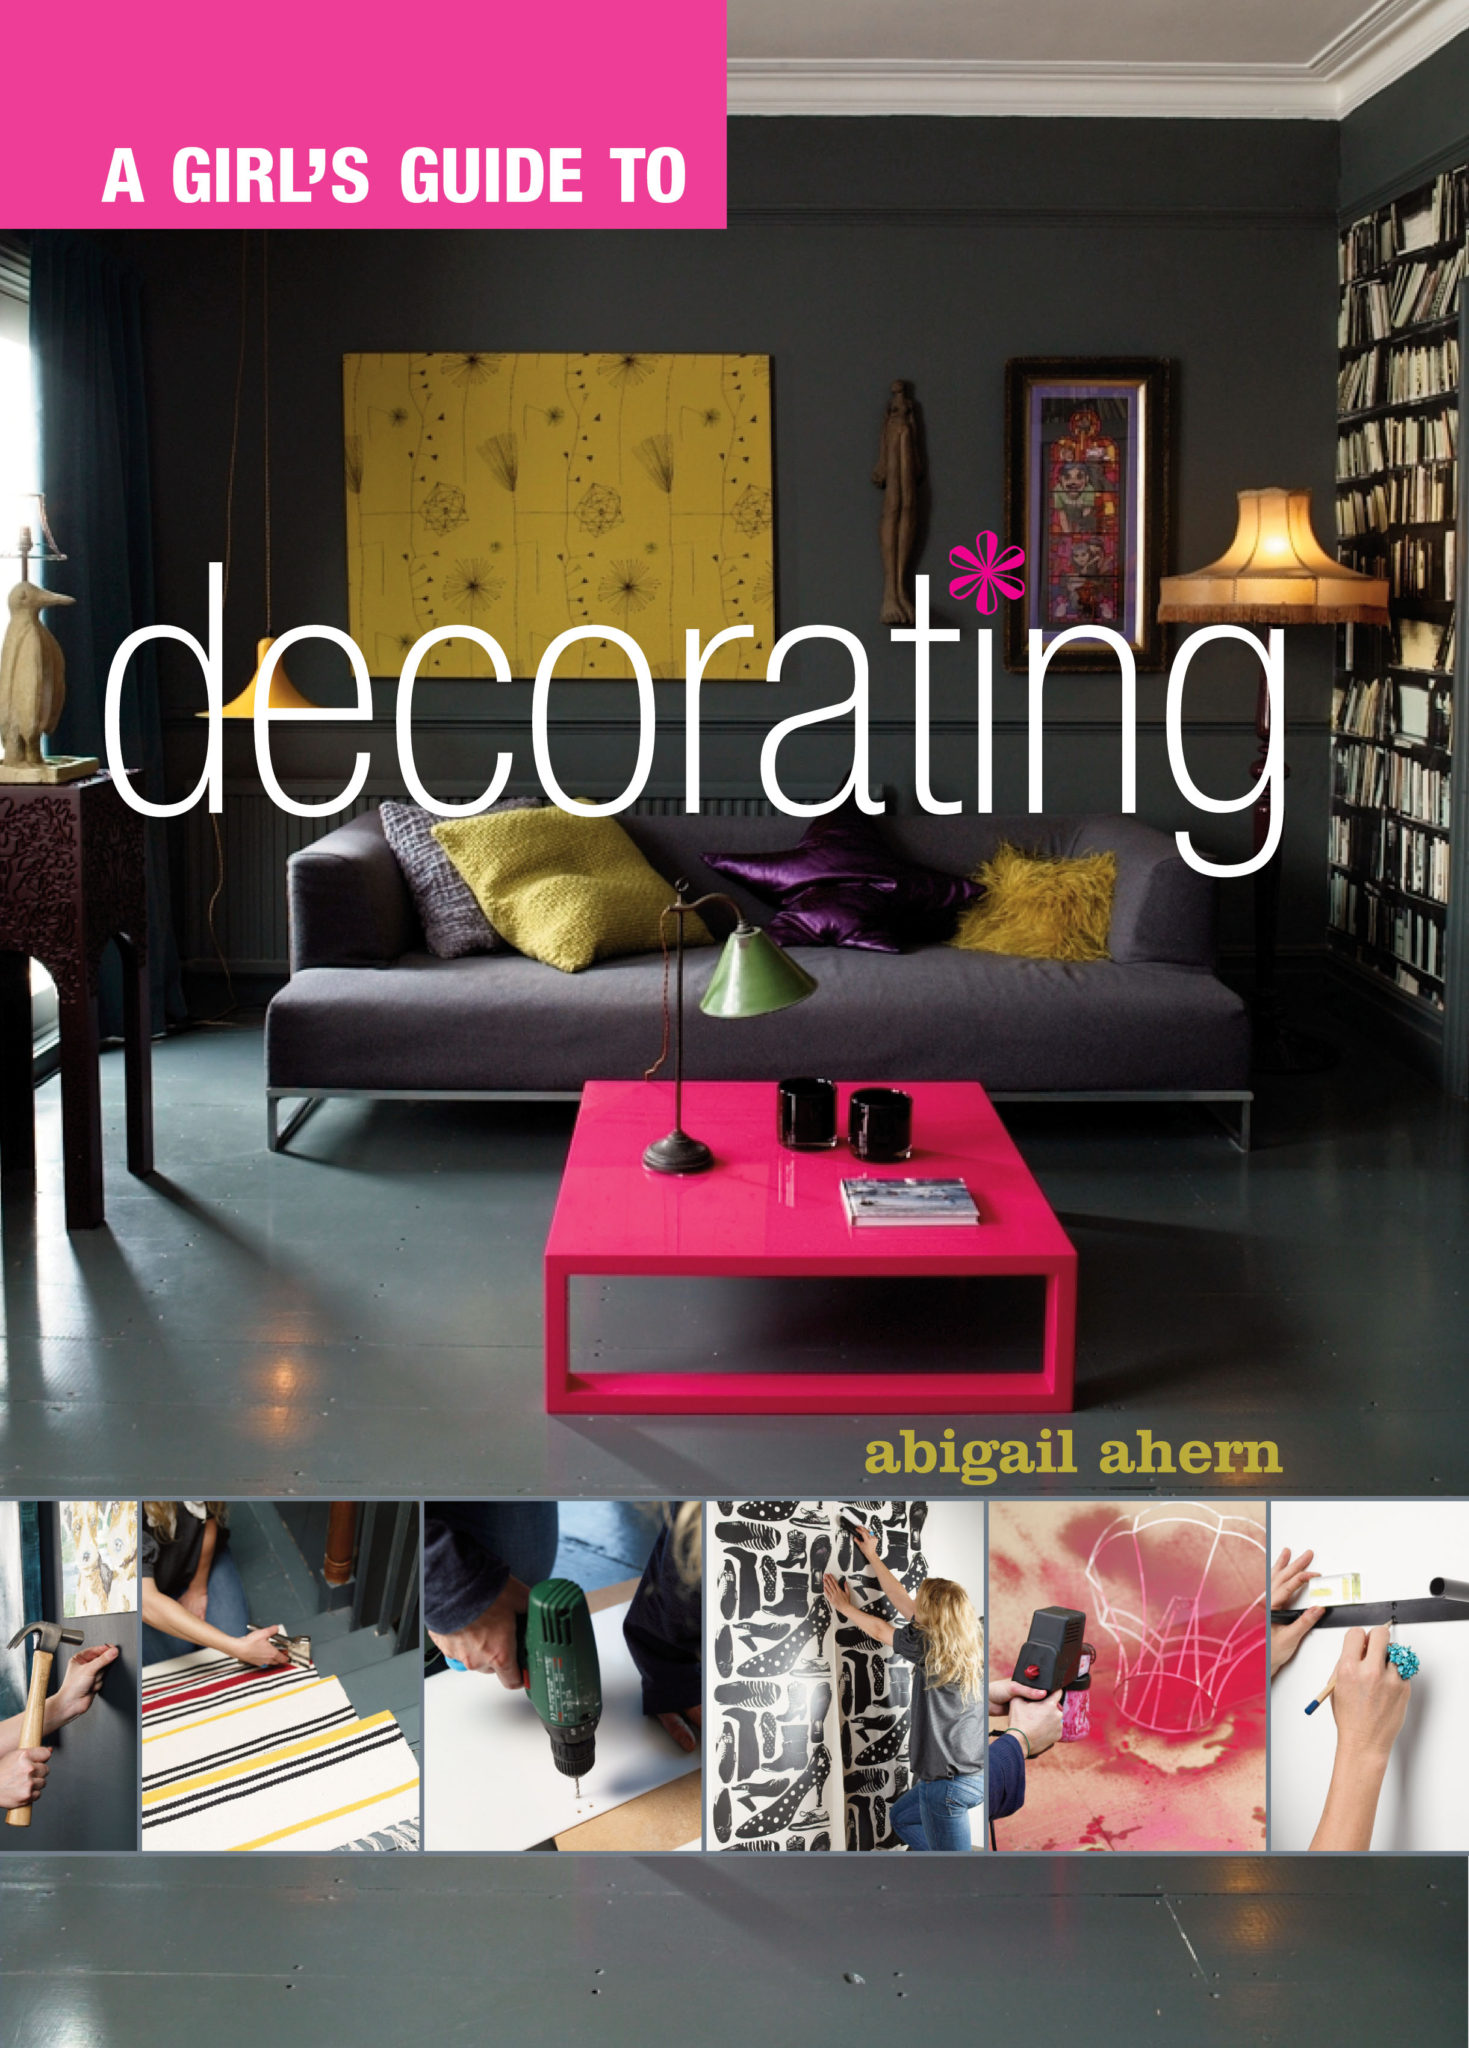 abigail ahern a girl's guide to decorating